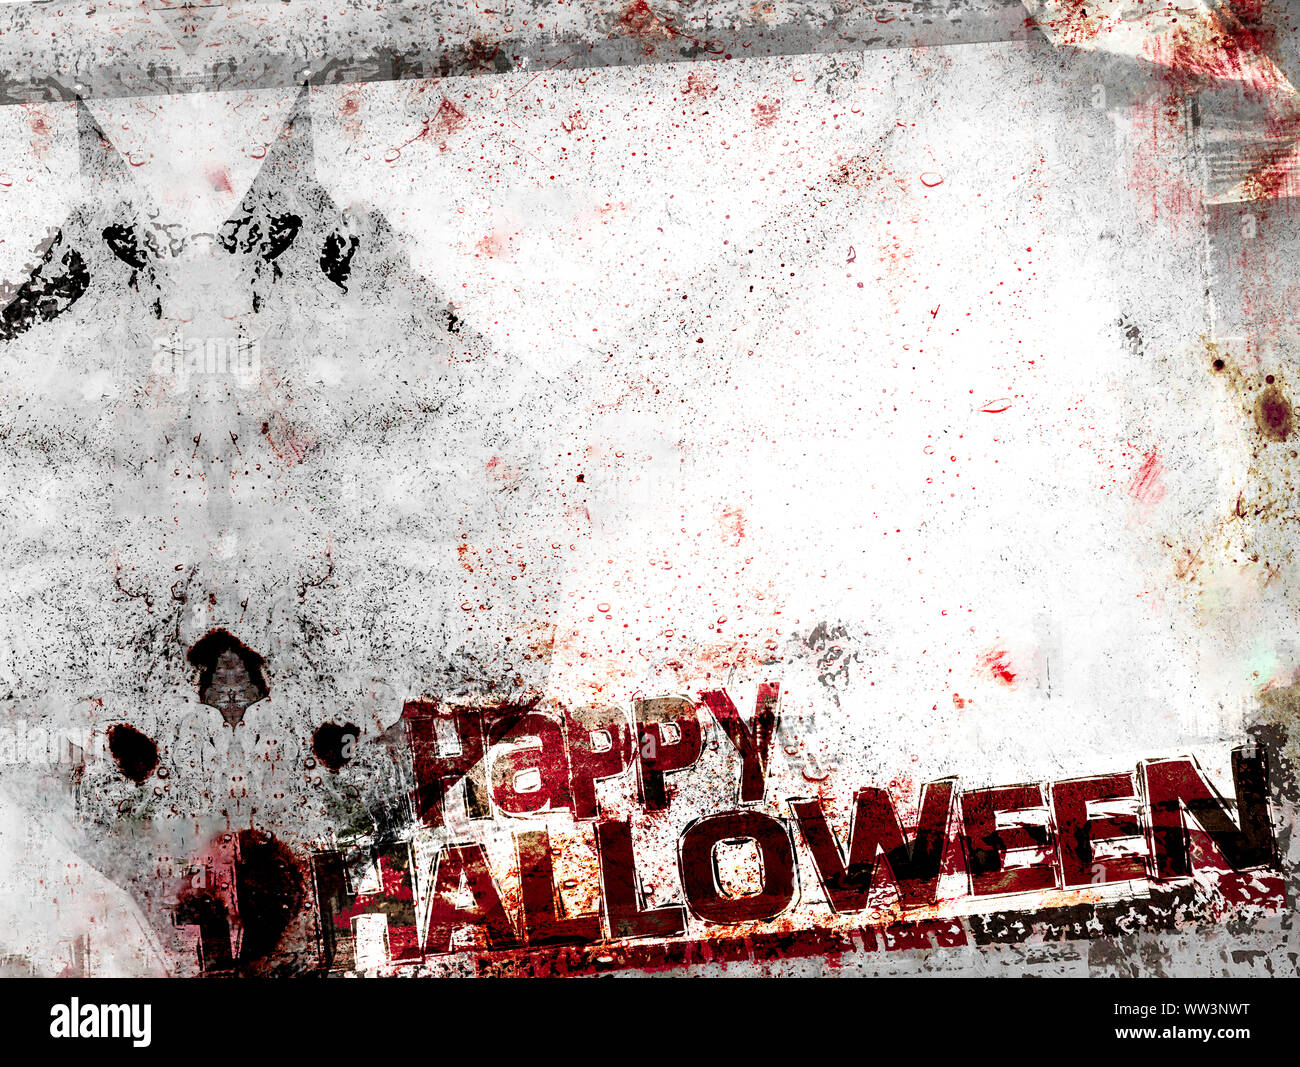 Spooky Halloween background with shadow of demon. Grungy frame, bloody patchy with remains of scotch tape and cellophane. Background fully editable. I Stock Photo